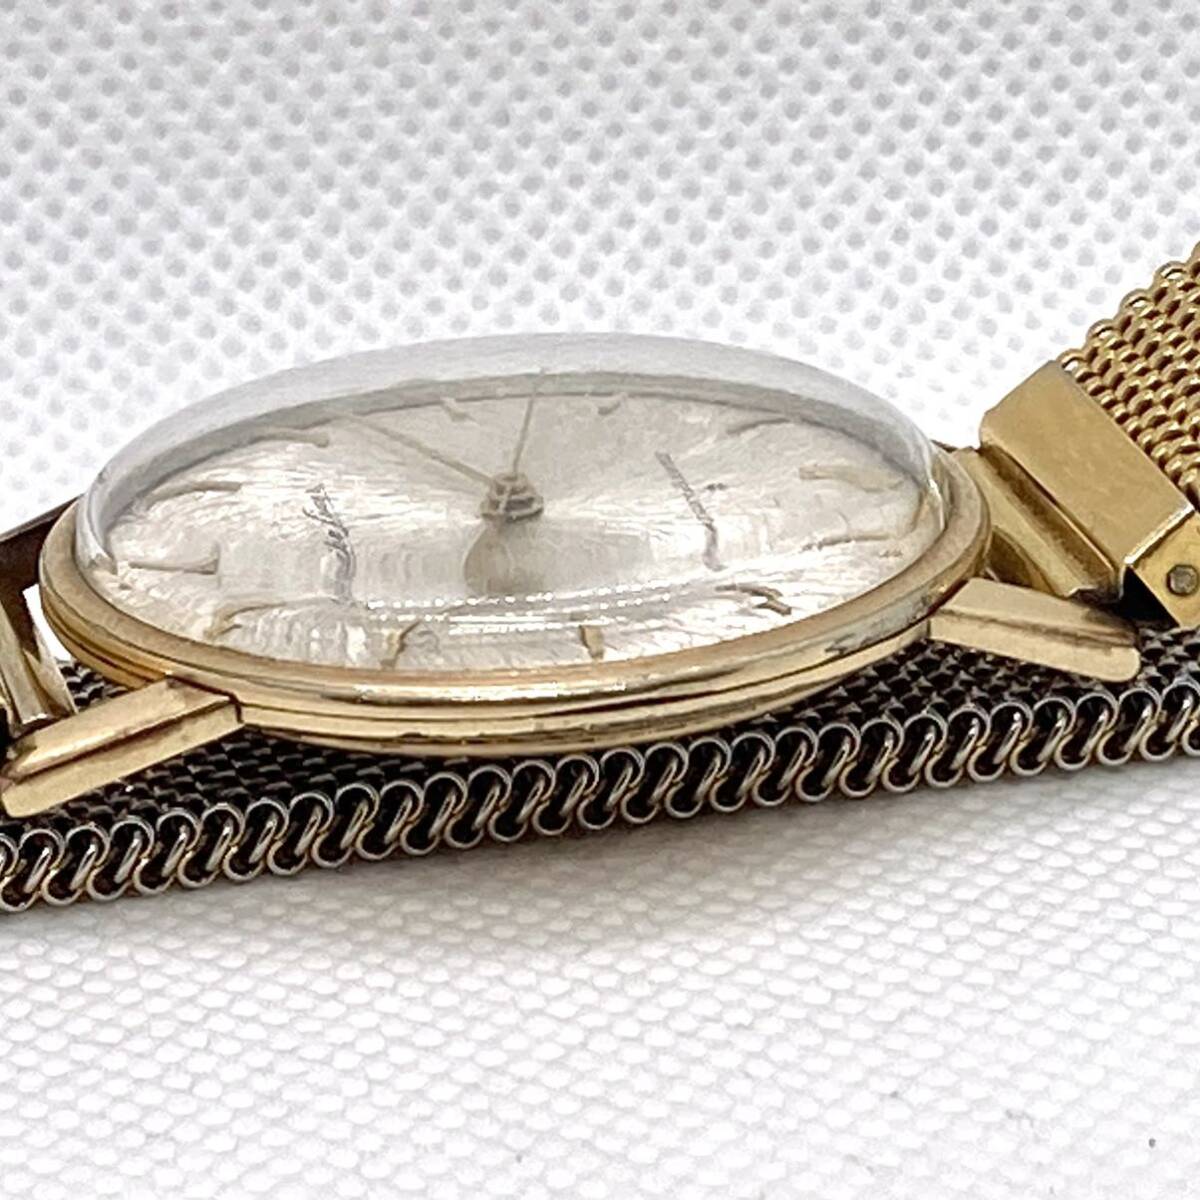 SEIKO　LINER　15010　Cal.3140　23石　手巻　ALL GOLD FILLED　3針　渦巻　希少　メンズ　ヴィンテージ　時計　セイコー　ライナー　_画像6